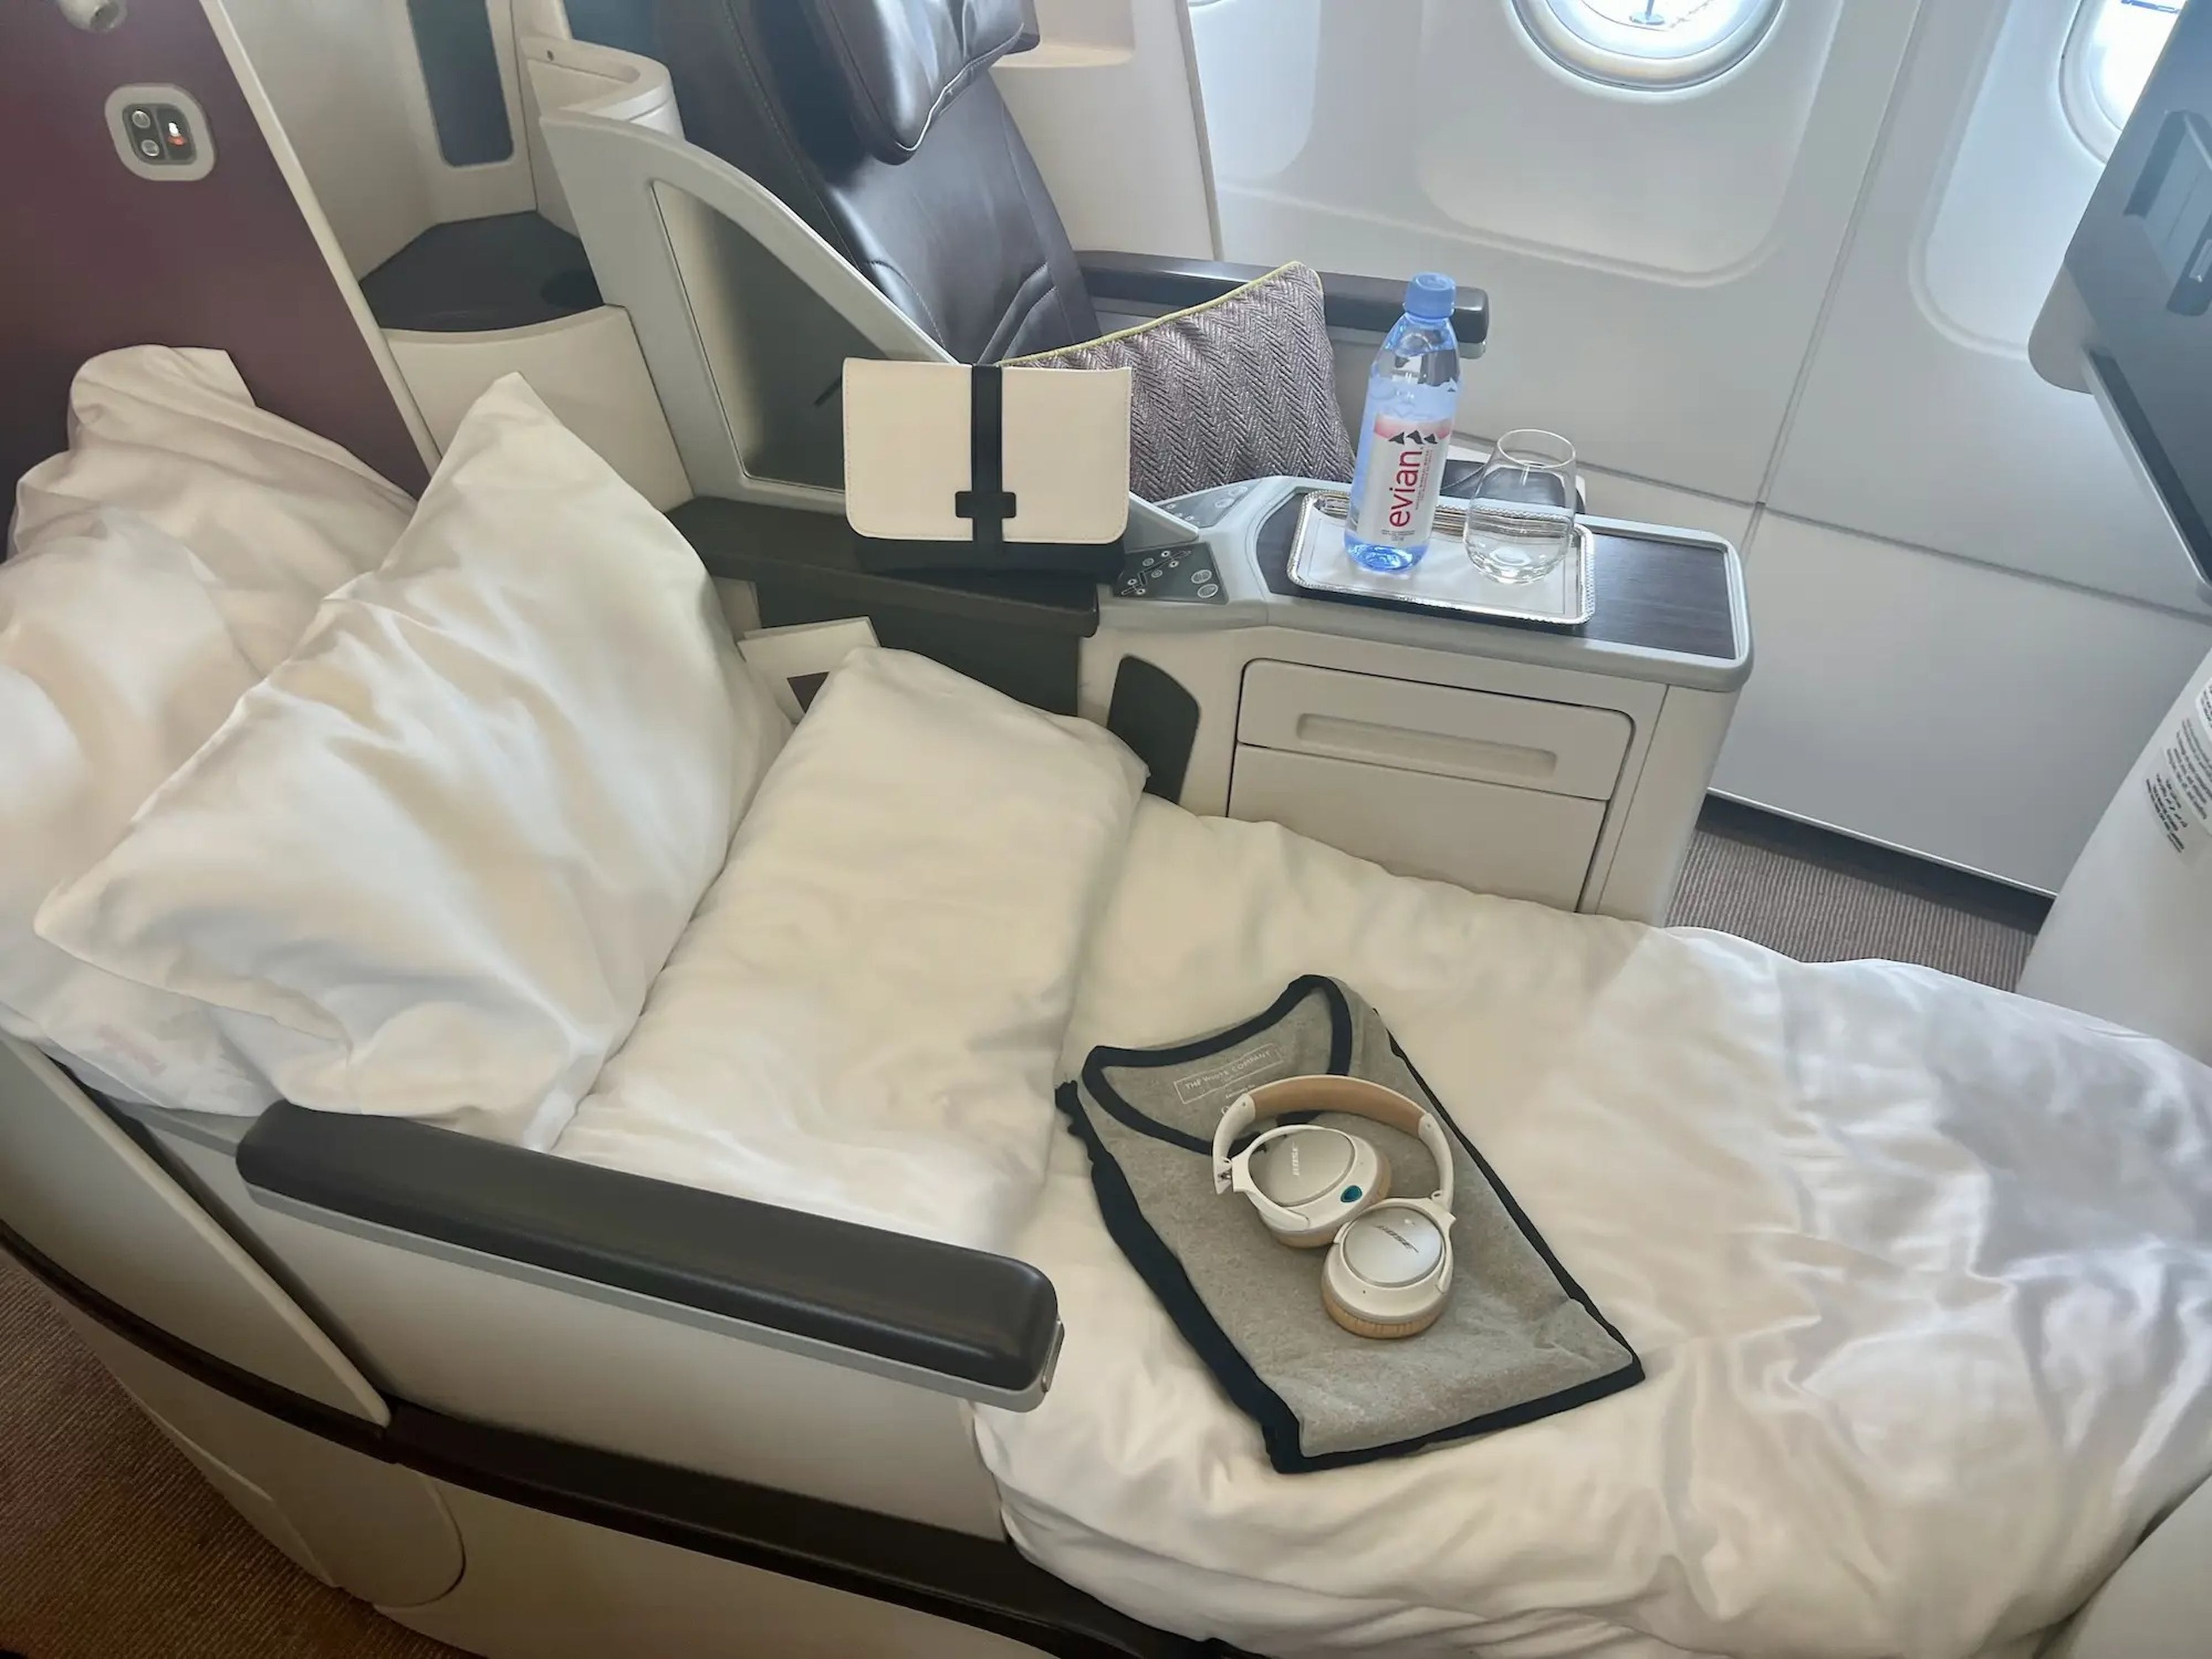 The business class seat in lie-flat mode with pajamas, a white amenity kit, and headphones